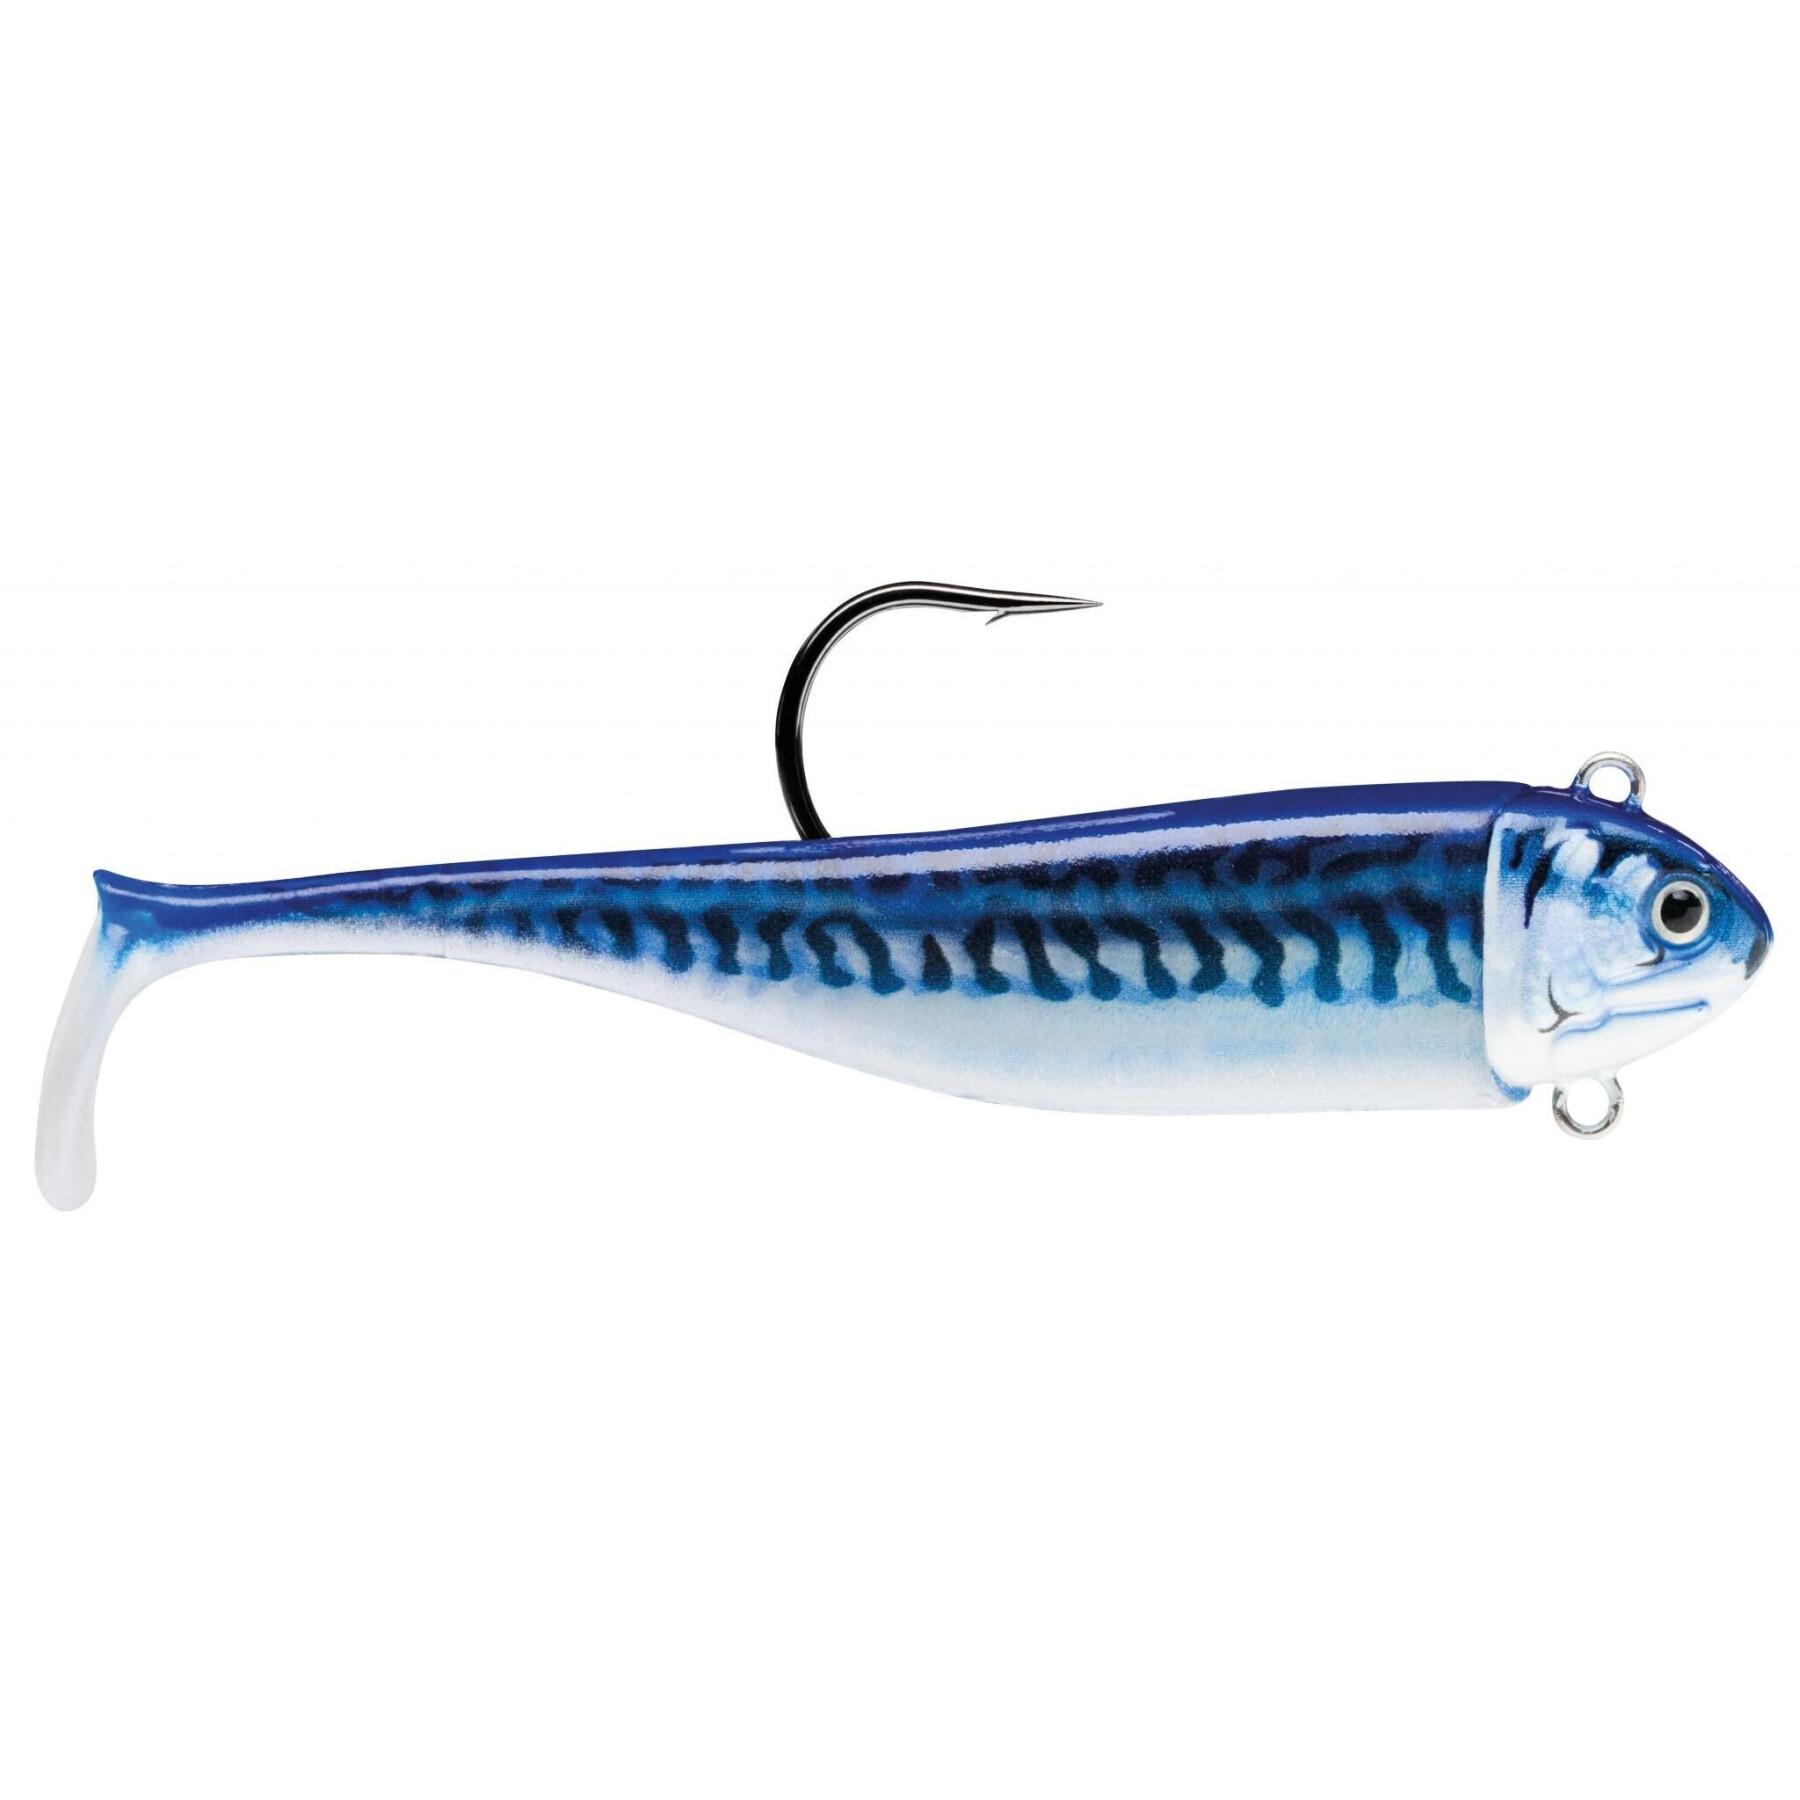 Lure Storm Biscay Minnow Light – 24g